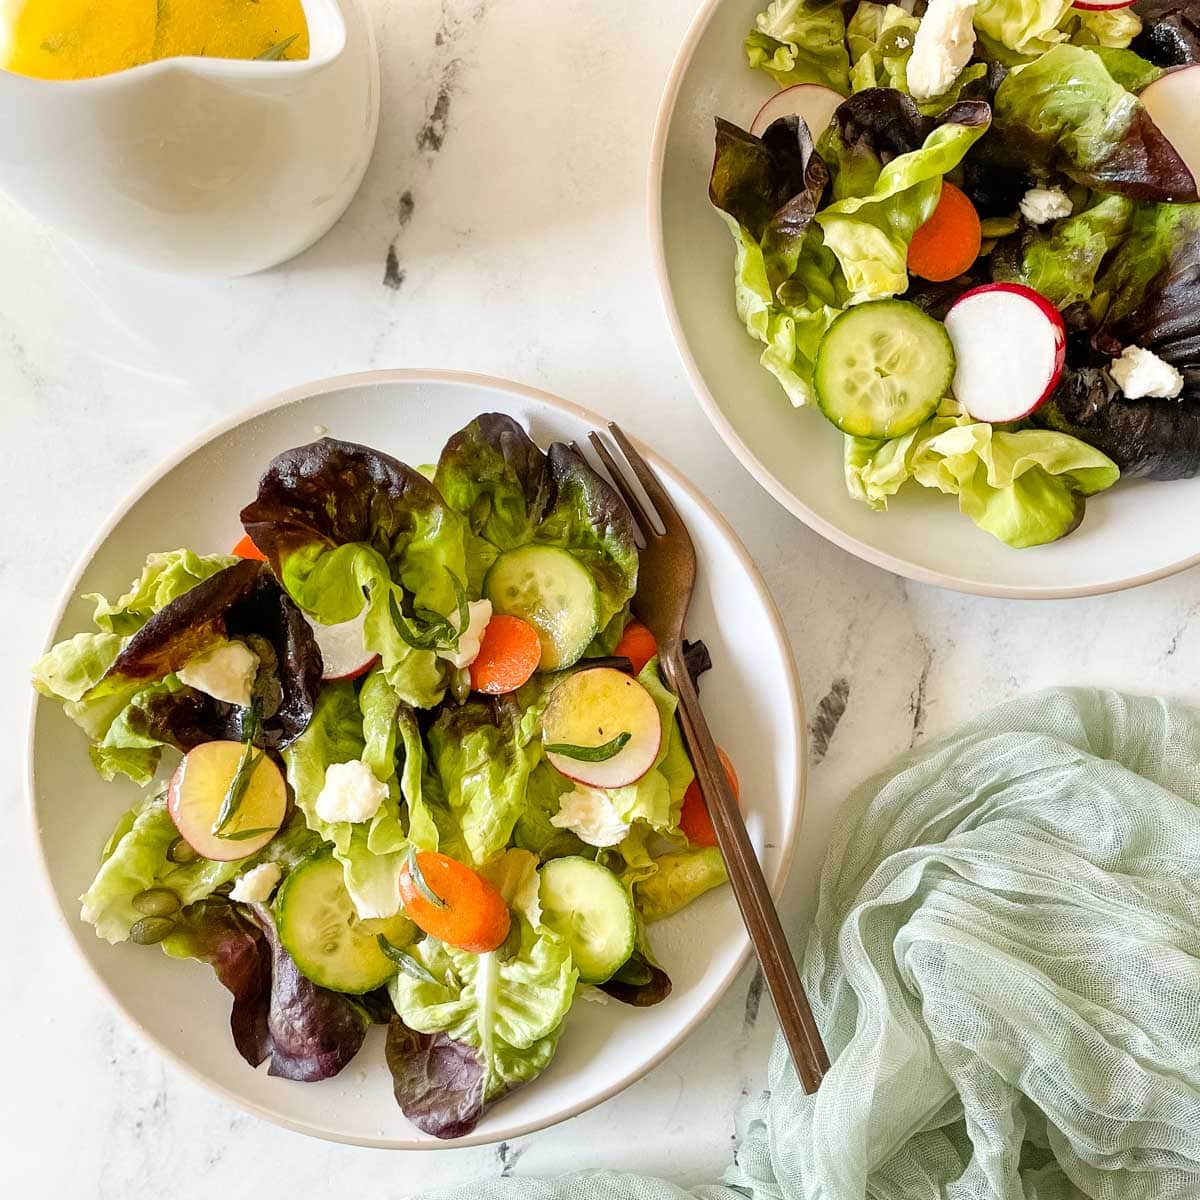 Two plates of side salad are shown dressing in a lemon herb vinaigrette.